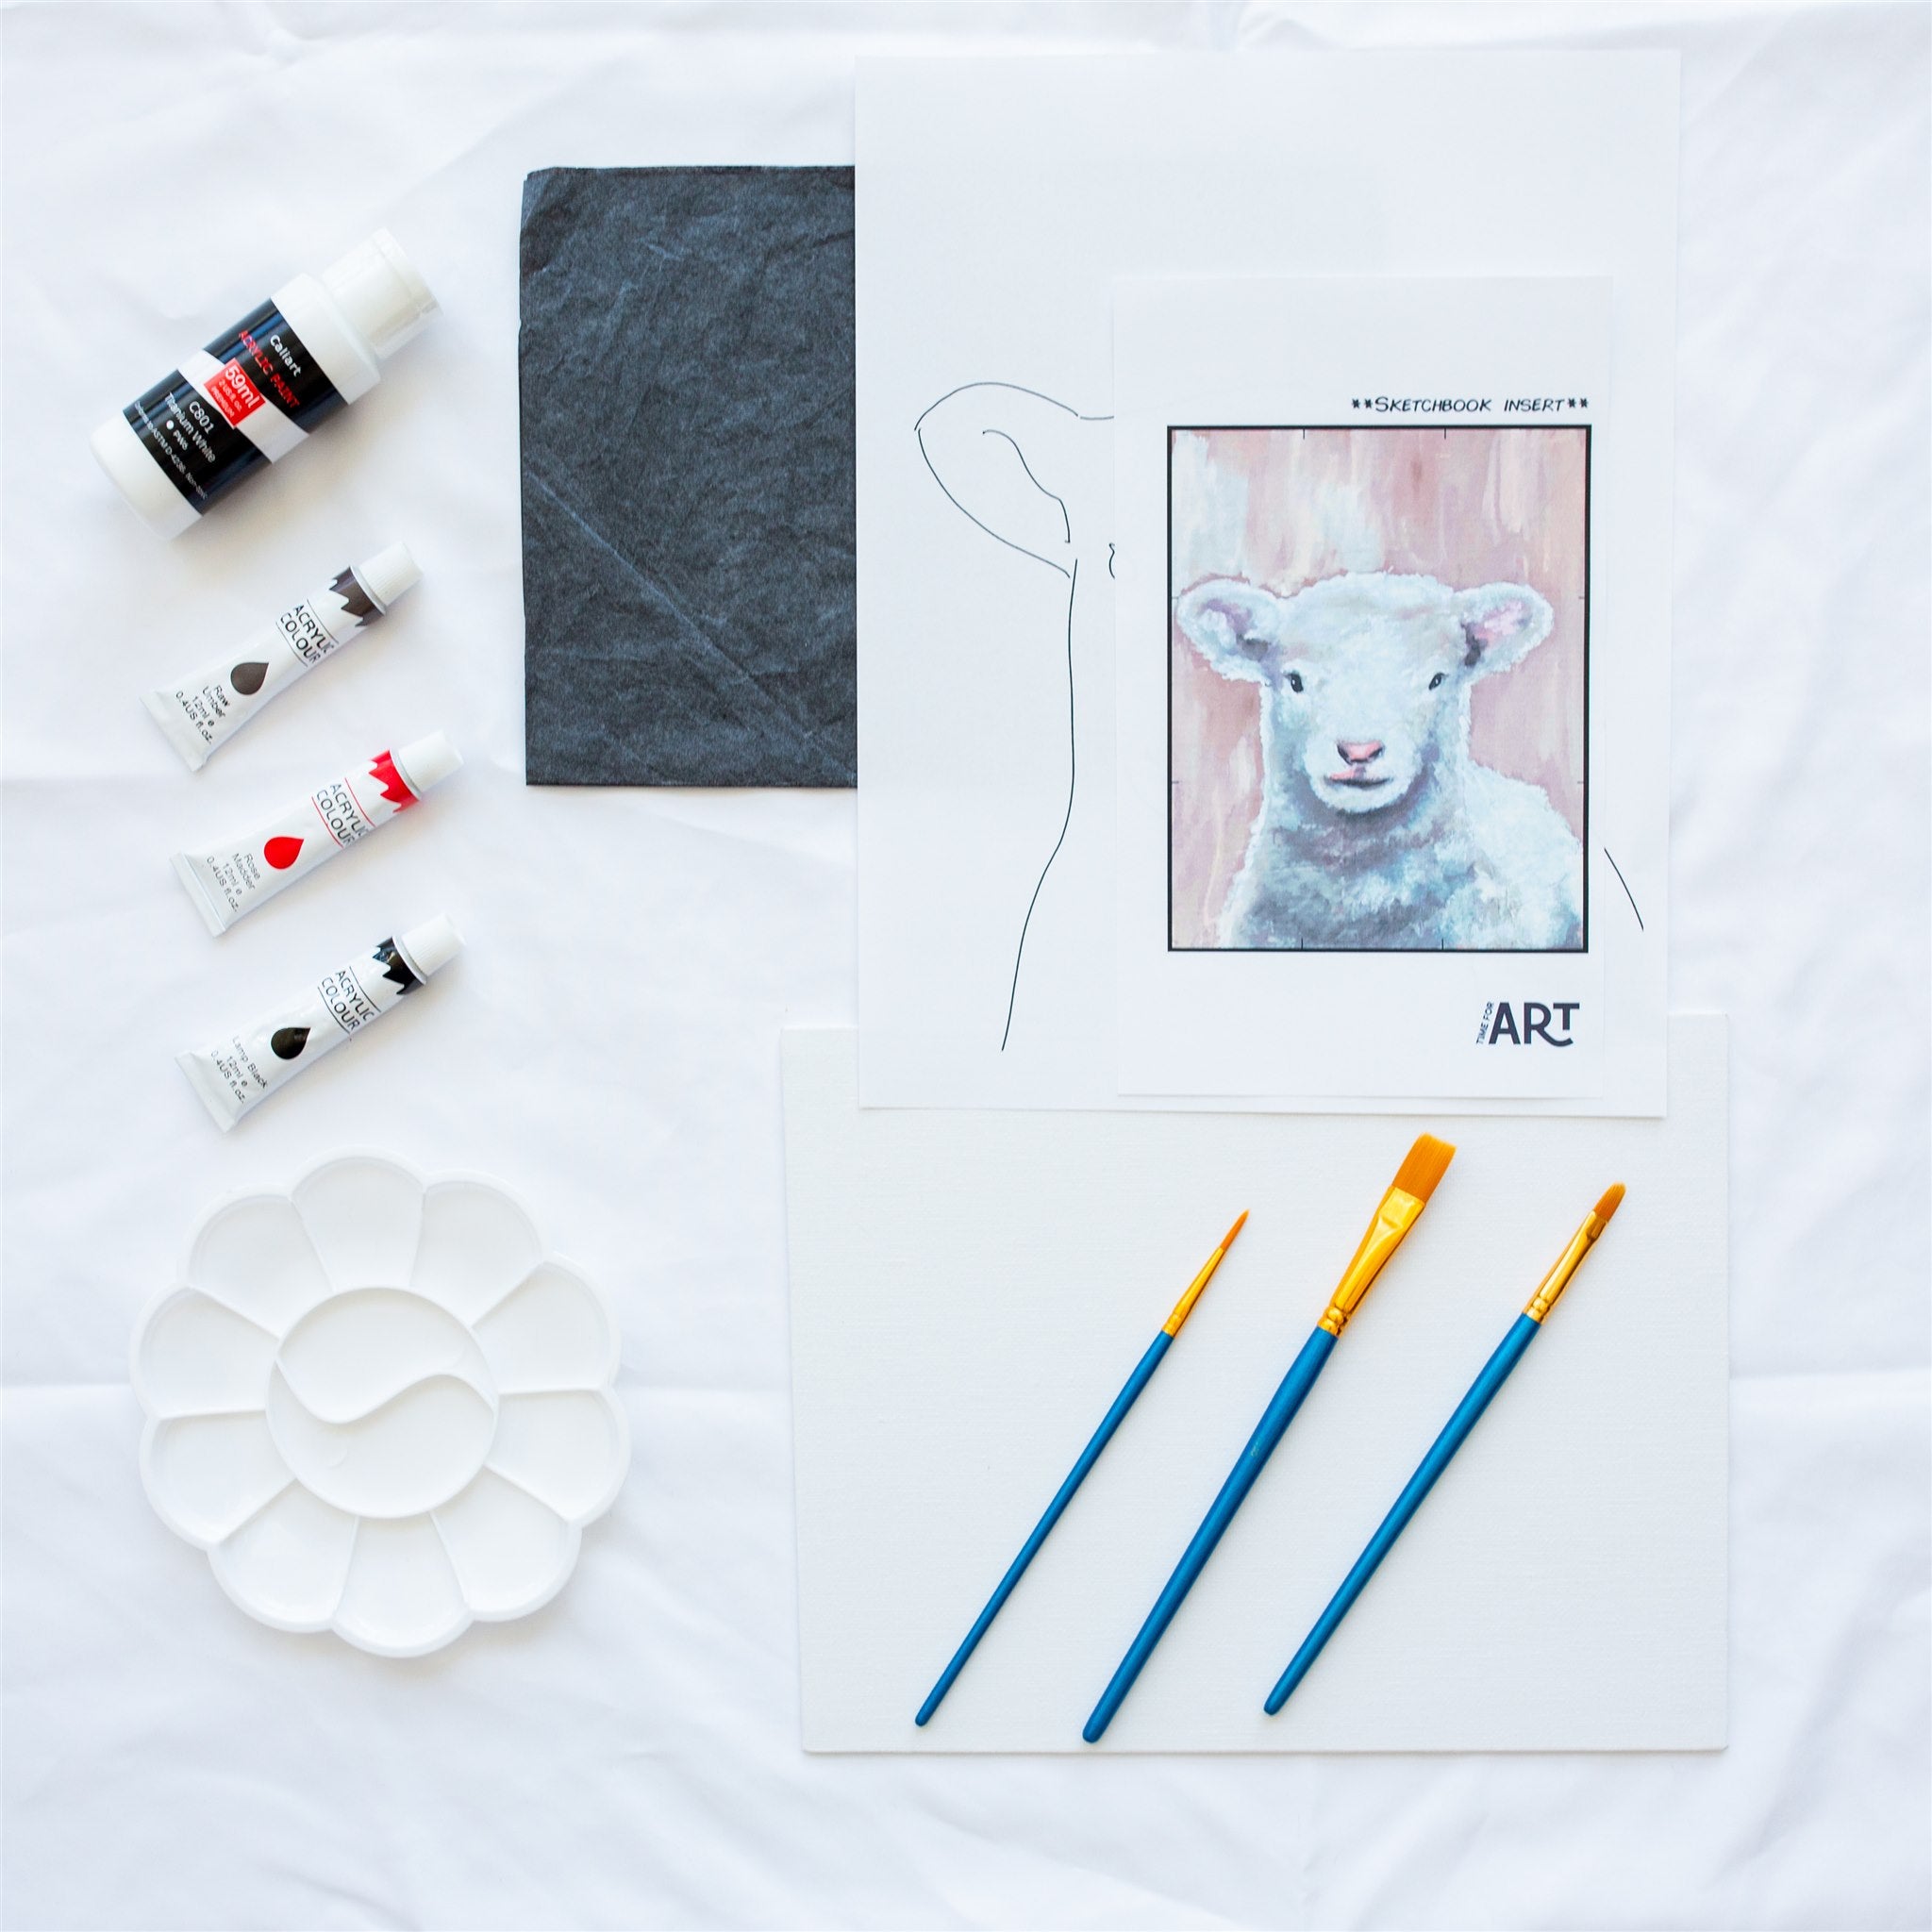 Whats includeWhats included in the baby sheep painting kit. 4 acrylic paints, painters pallet, brushes, canvas panel, traceable outline, and reference image.